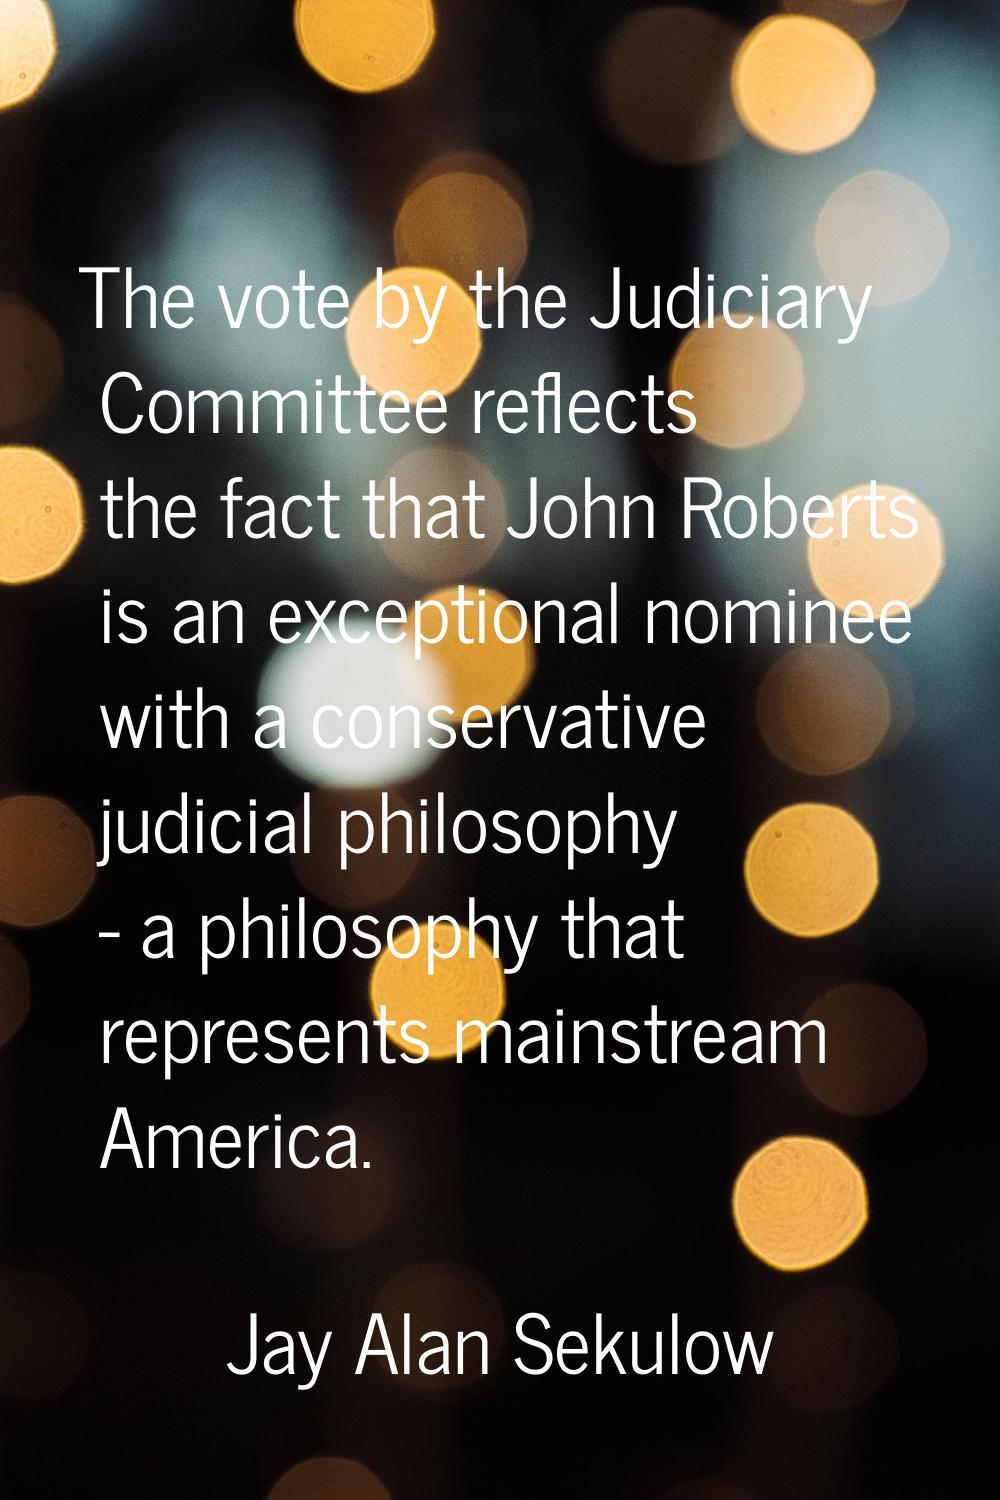 The vote by the Judiciary Committee reflects the fact that John Roberts is an exceptional nominee w